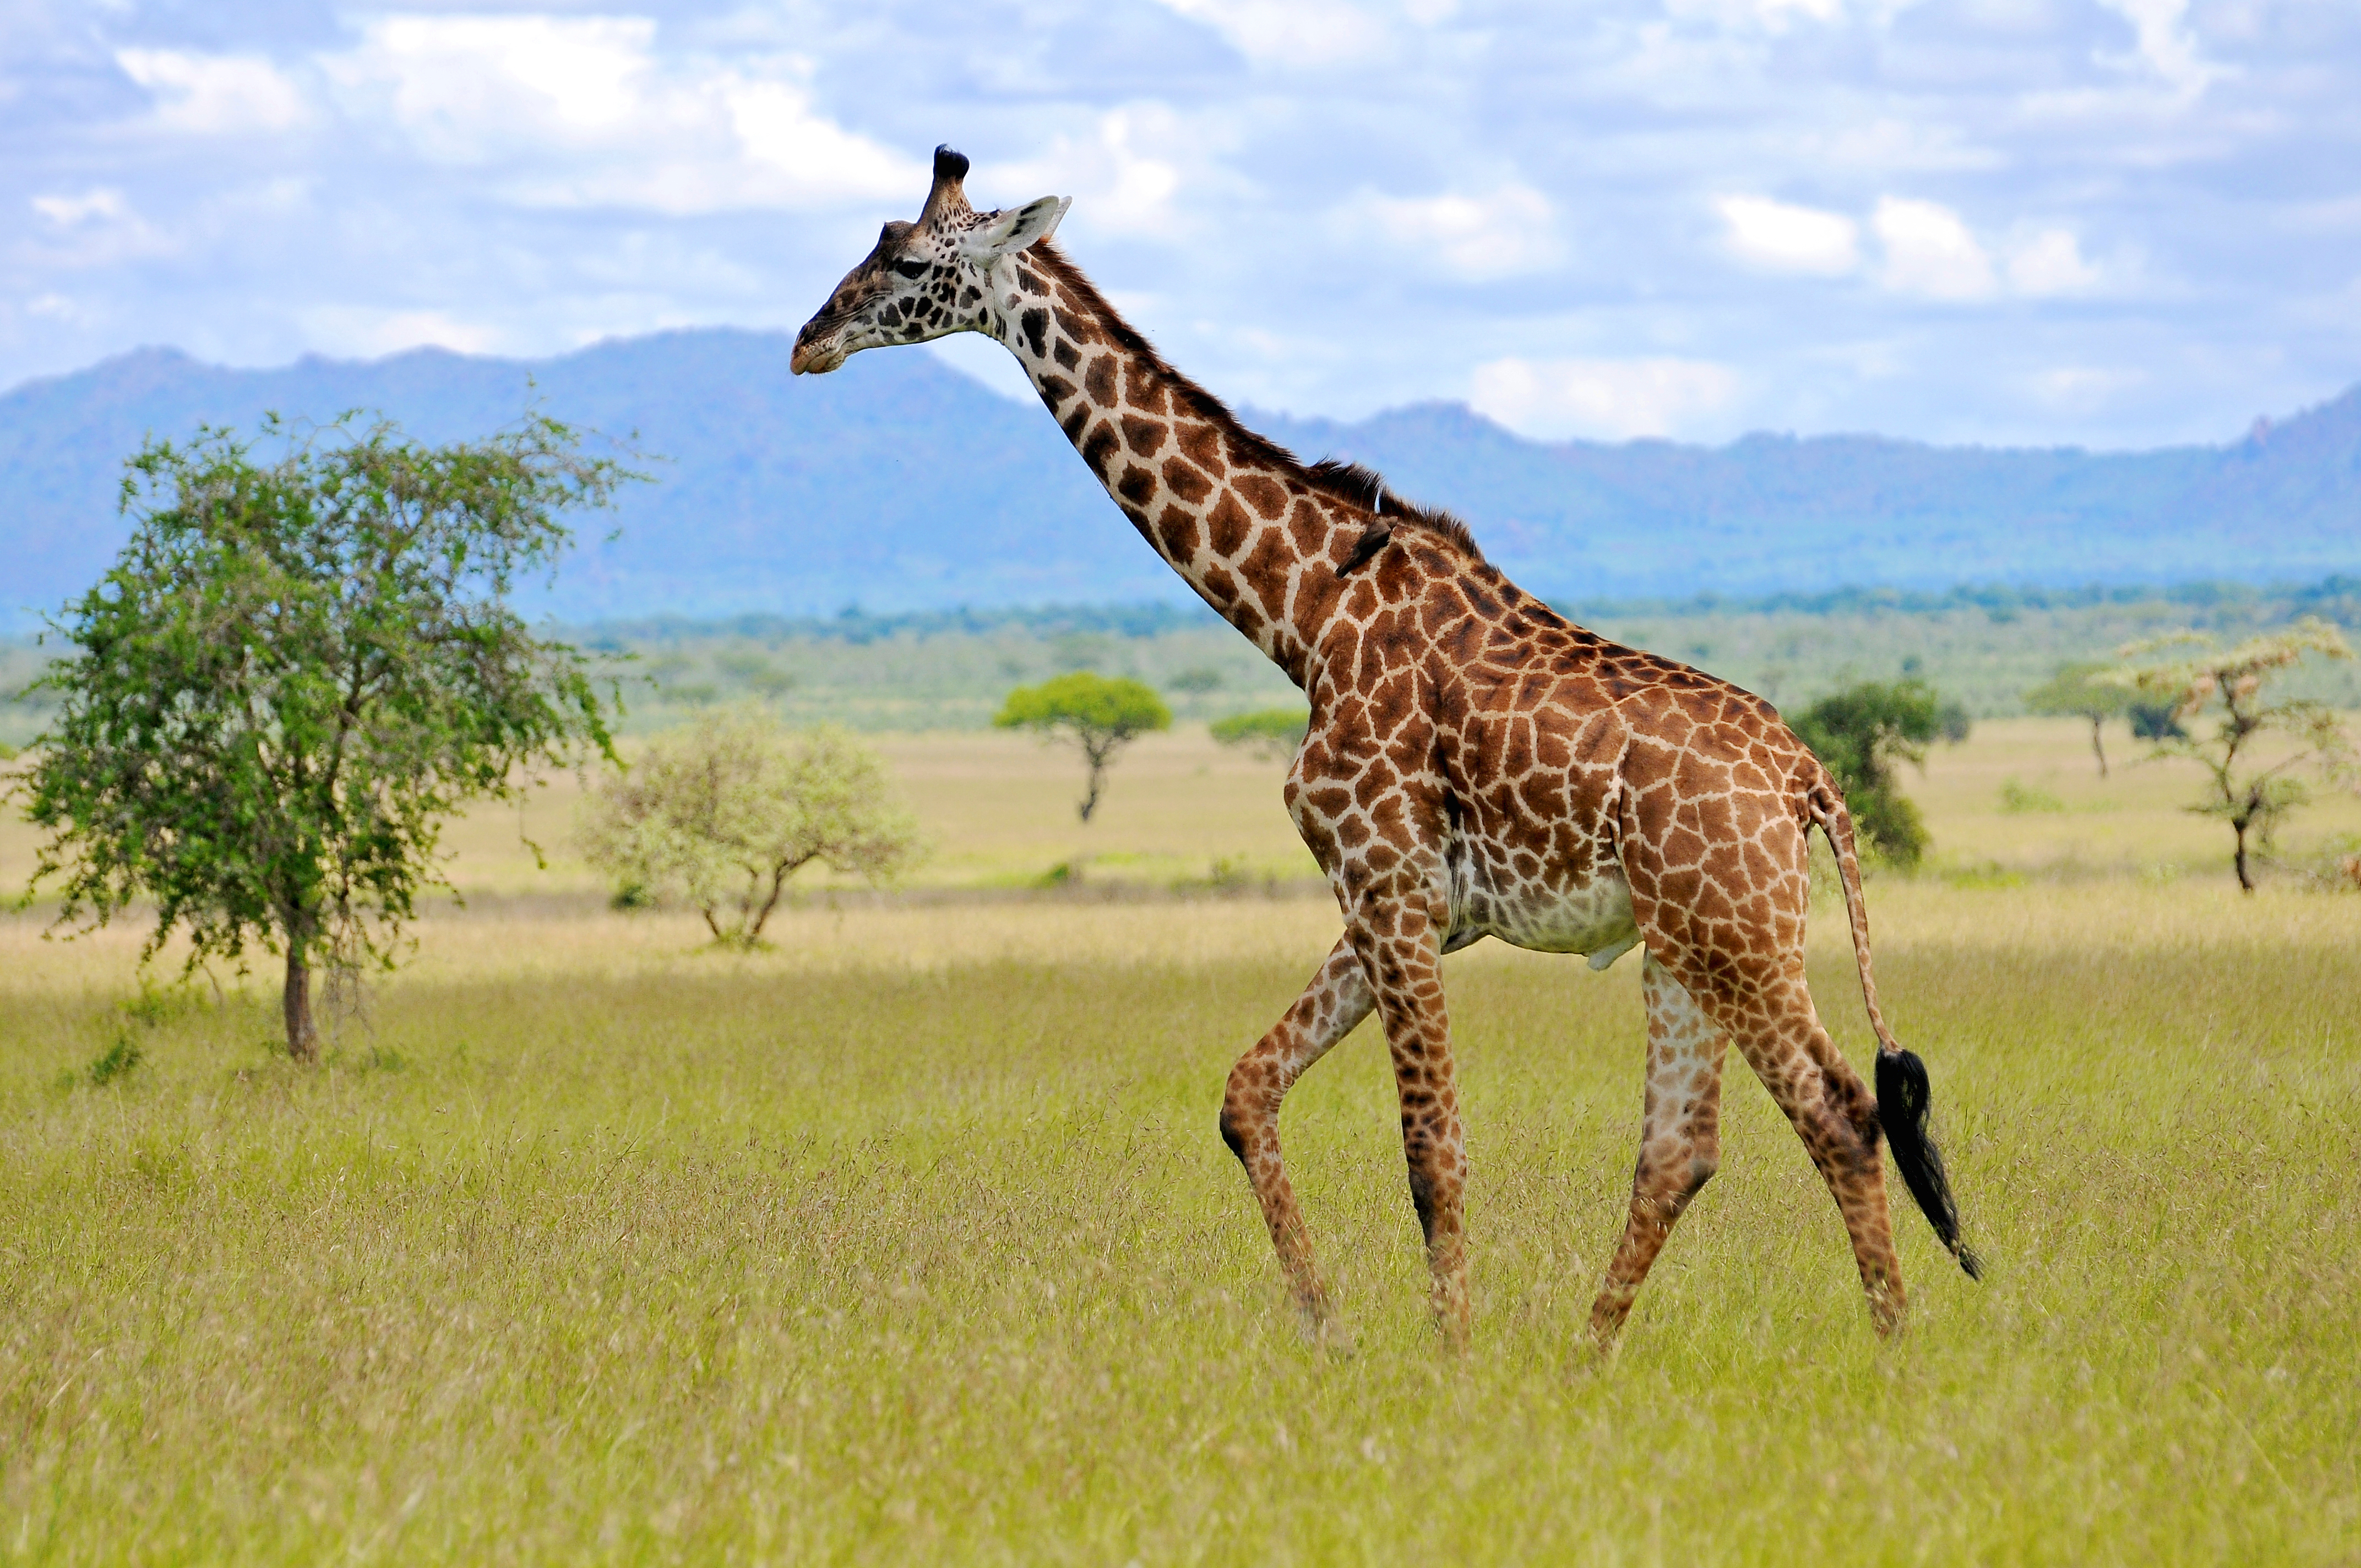 An adult giraffe, with a long neck and large brown spots covering its tan hide, walks the savannah.